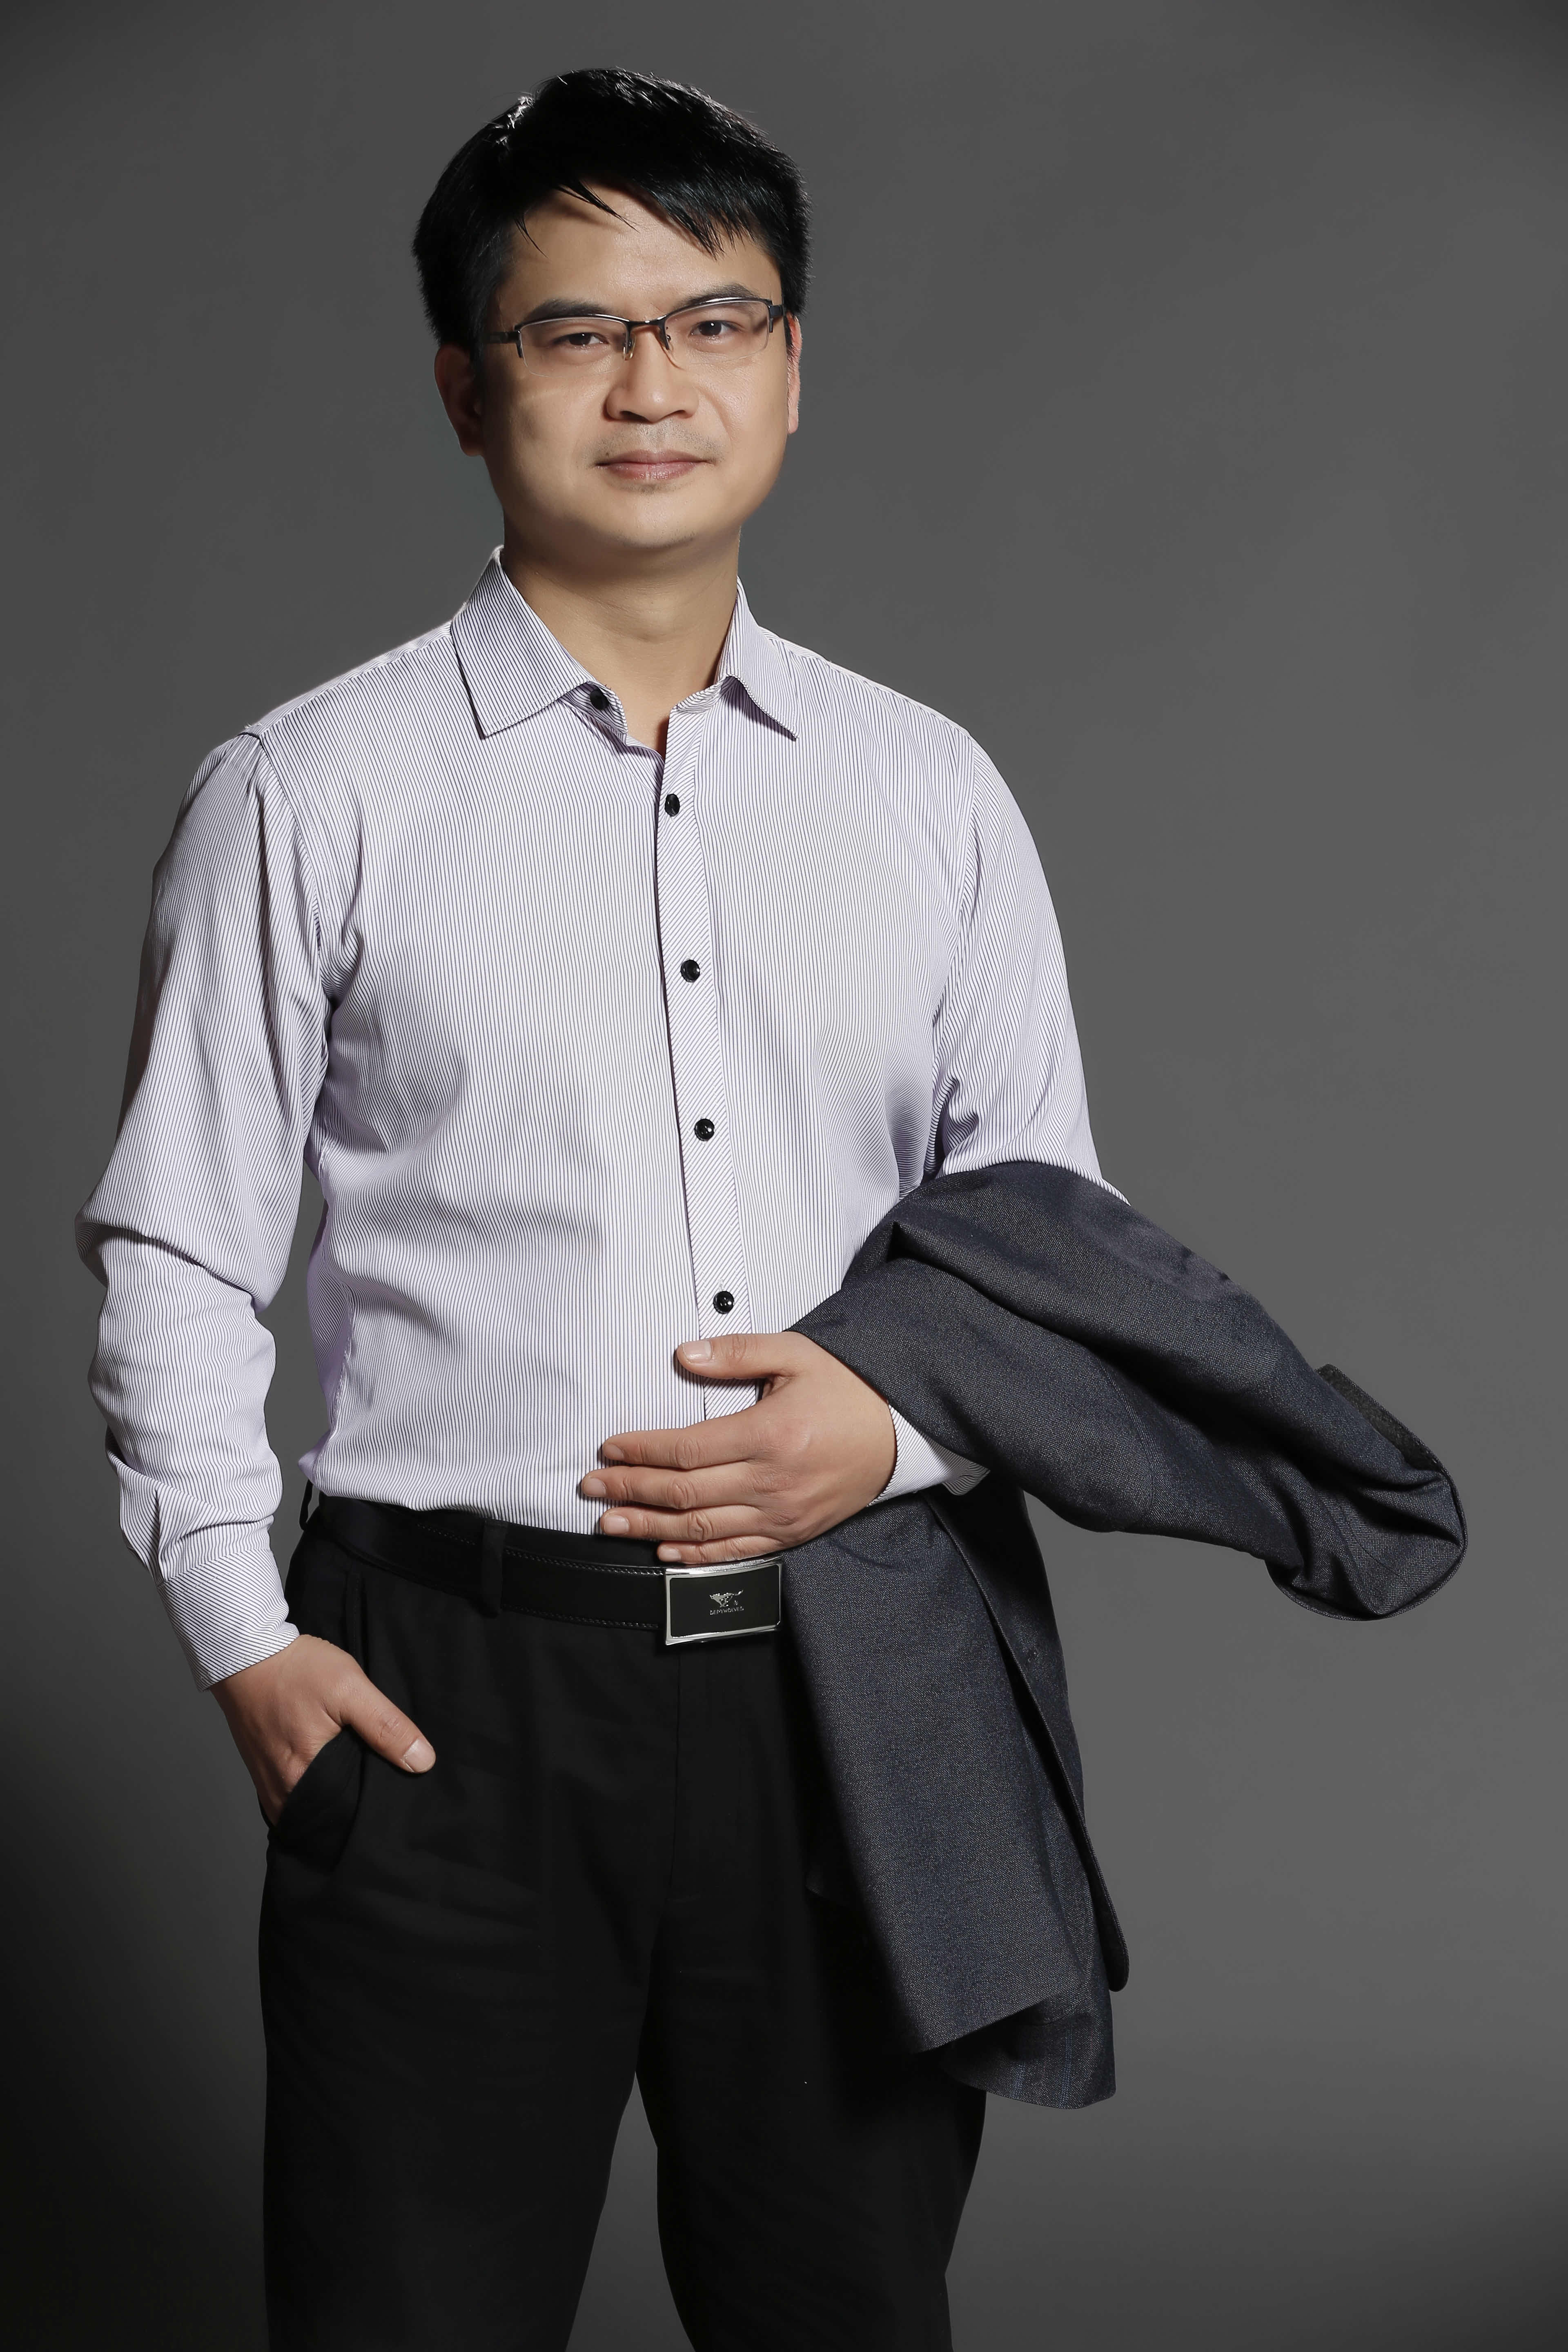 Du Chaoliang:Founder And CEO